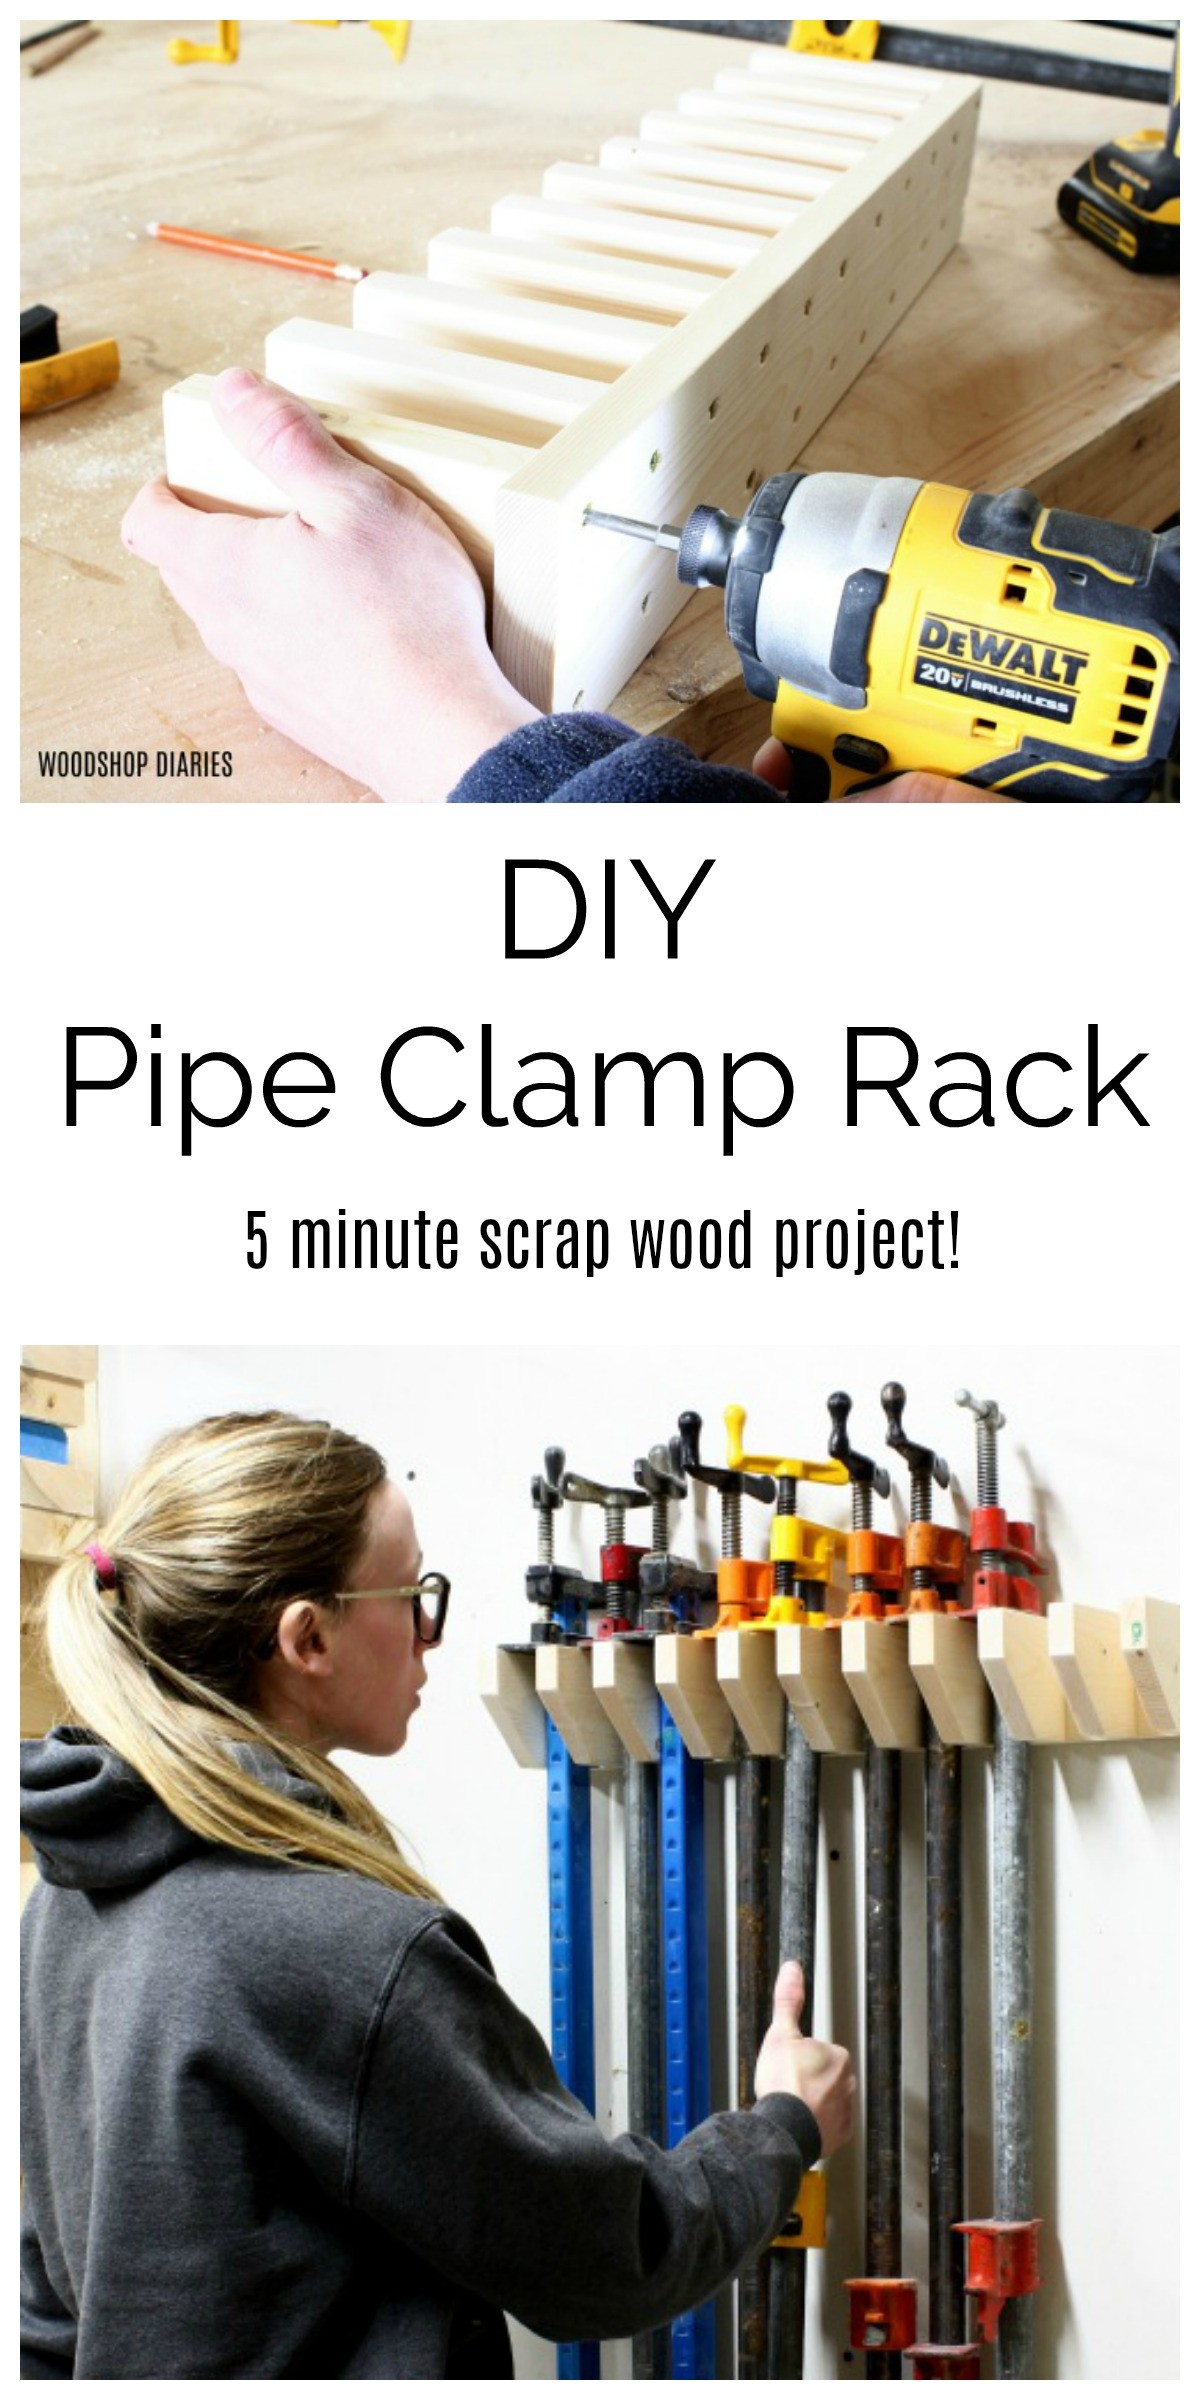 DIY Pipe Clamp Rack Collage Pinterest Image